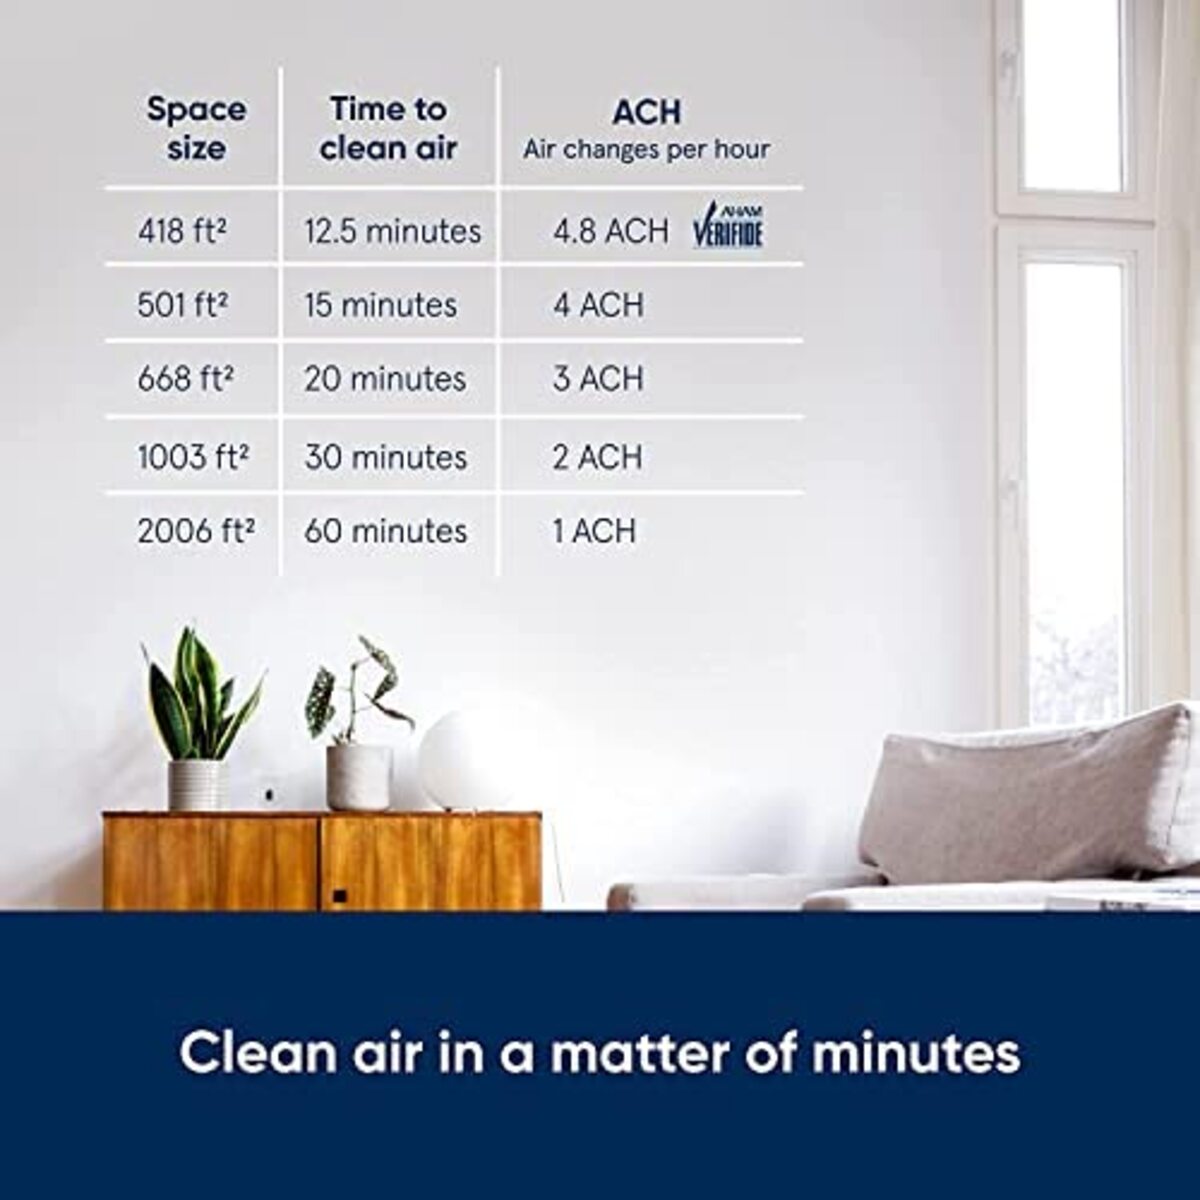 Blueair Healthprotect 7470I Air Purifier With Hepasilent Ultra Filtration And Germshield Technology - Medium Room